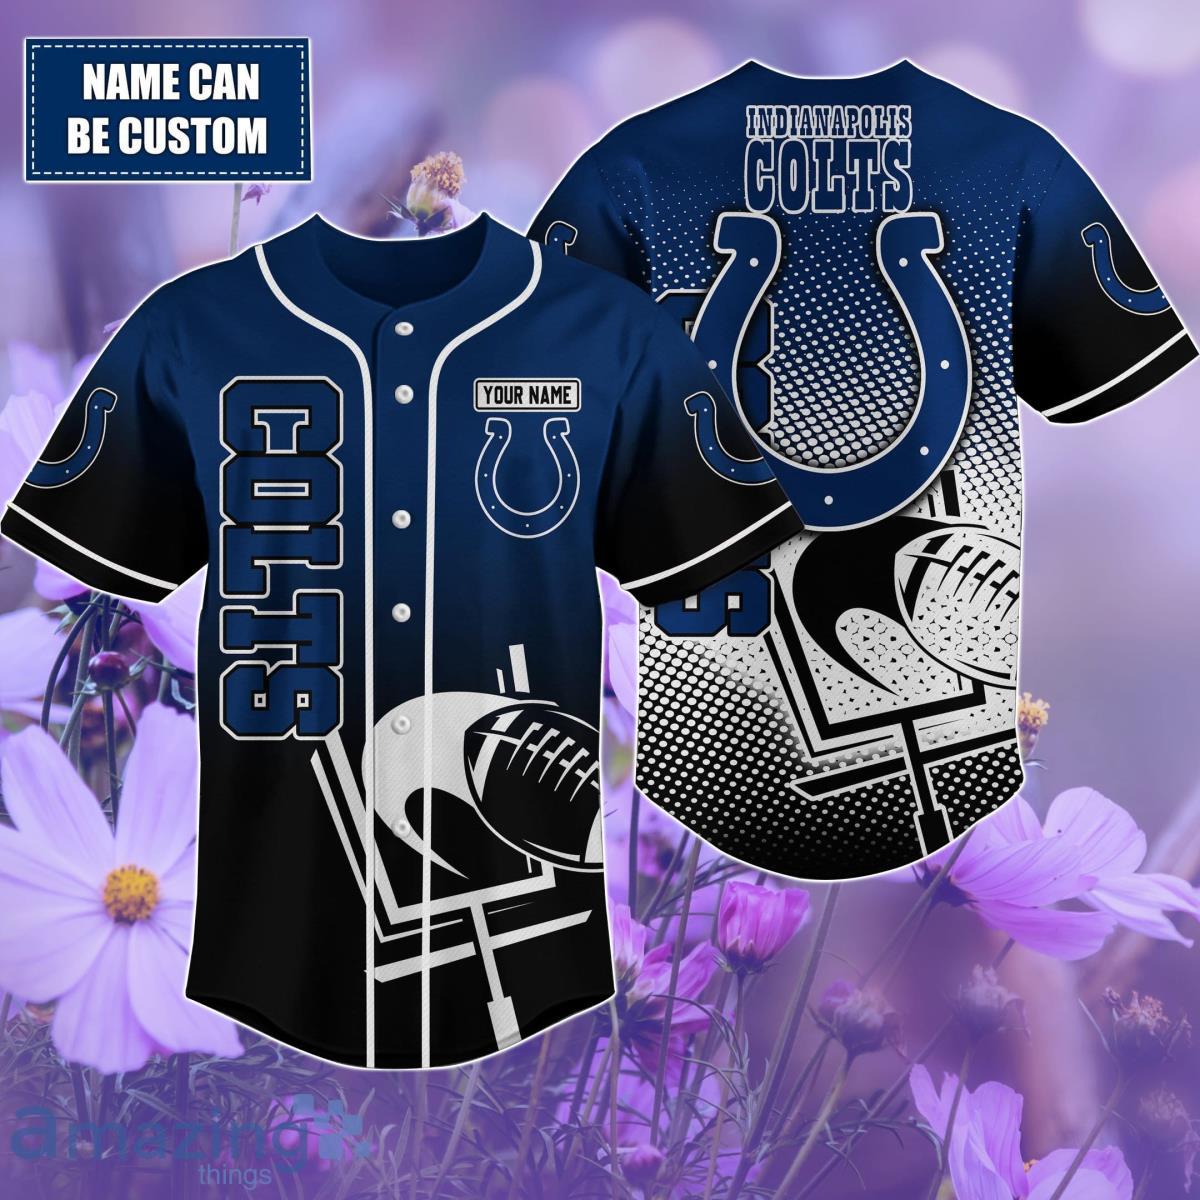 Indianapolis Colts Custom name Baseball Shirt Best Gift For Men And Women